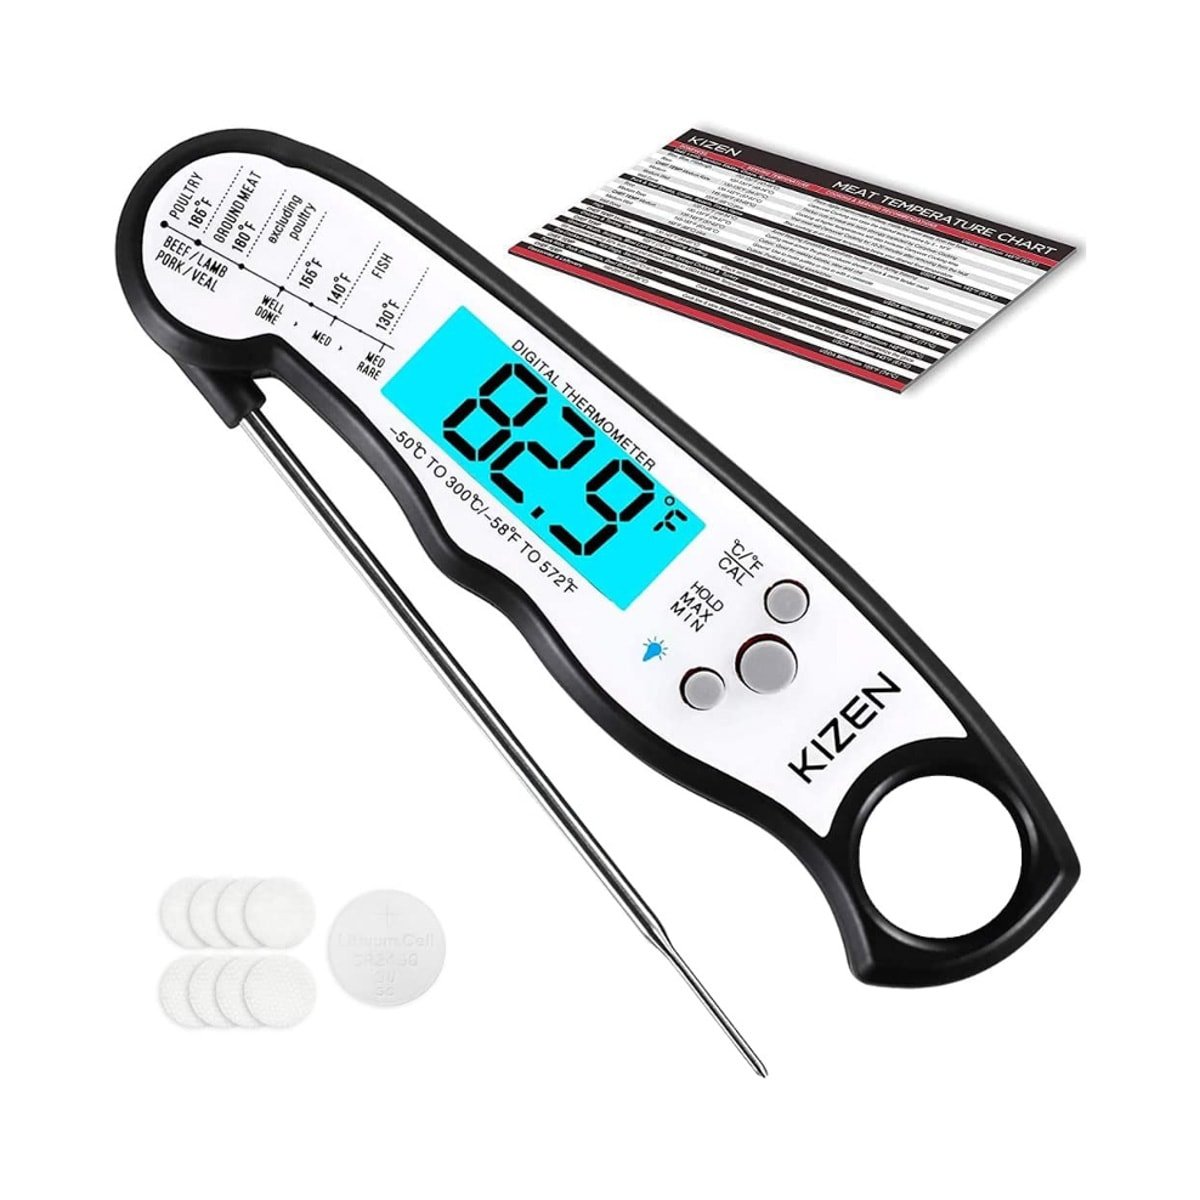 A meat thermometer with a digital display.